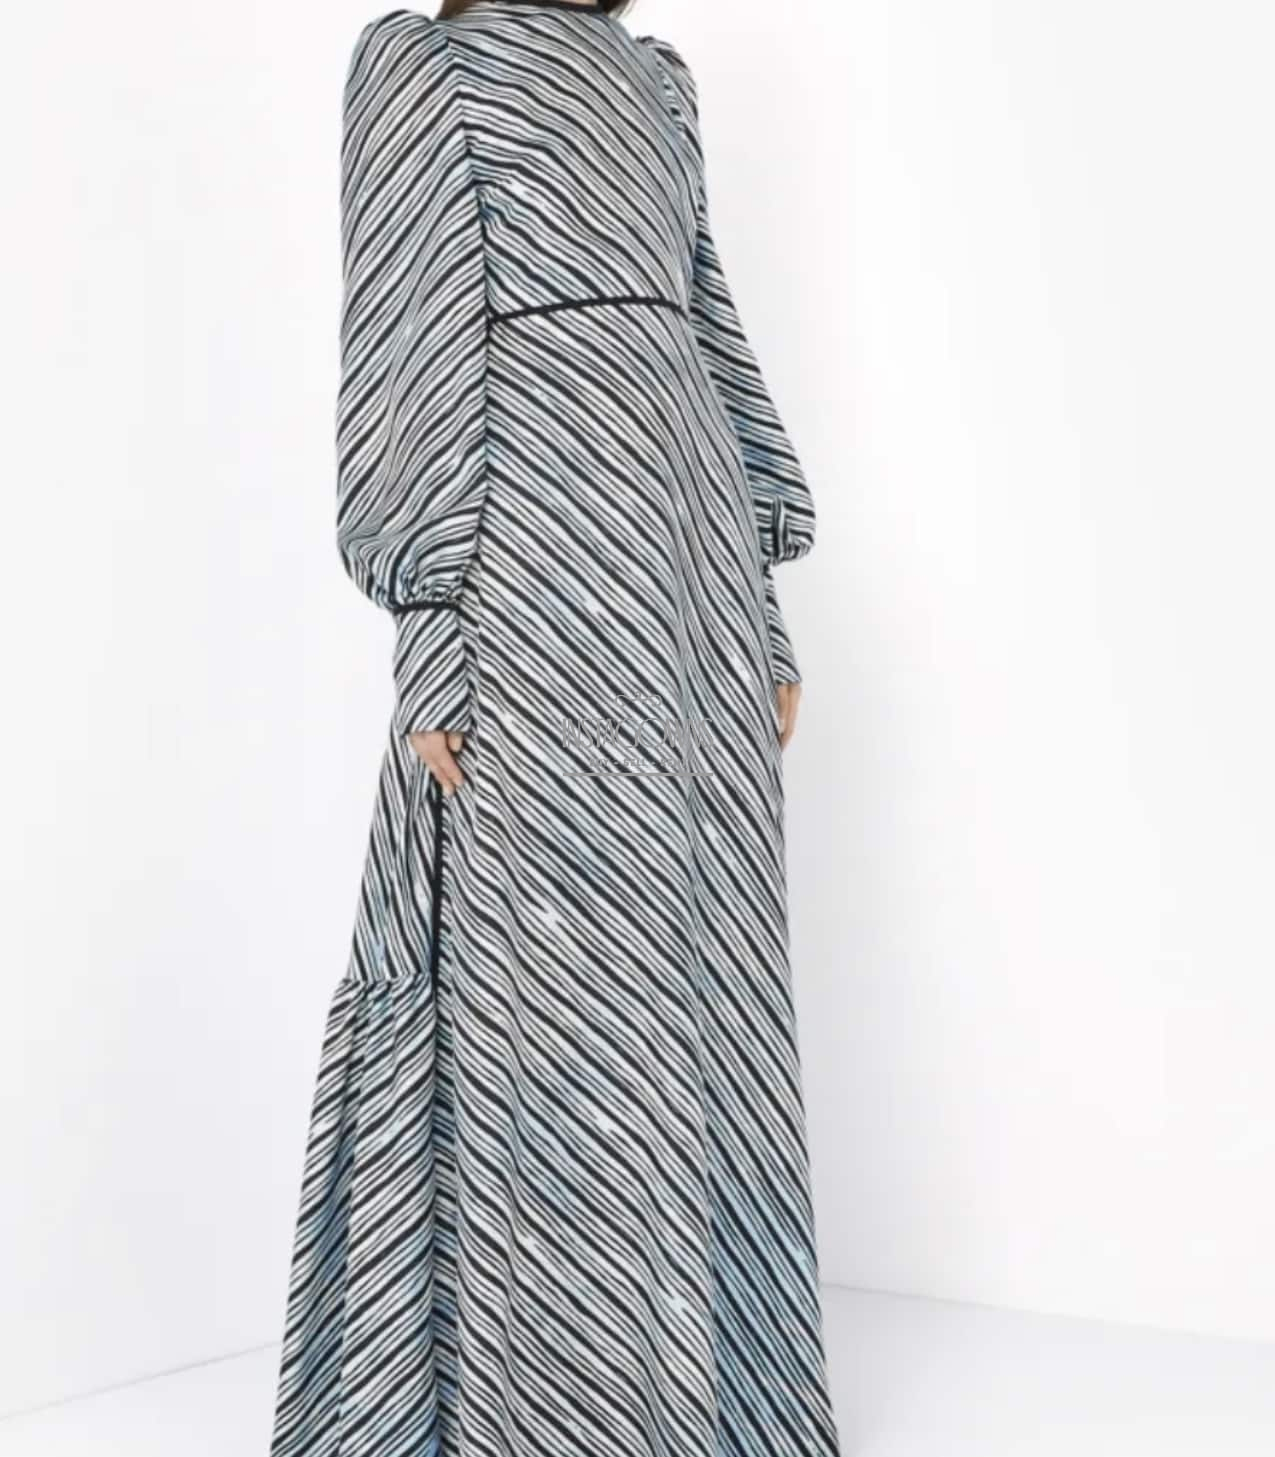 Designer Fendi brand new with tag exquisite silk gown for sale – Instagowns